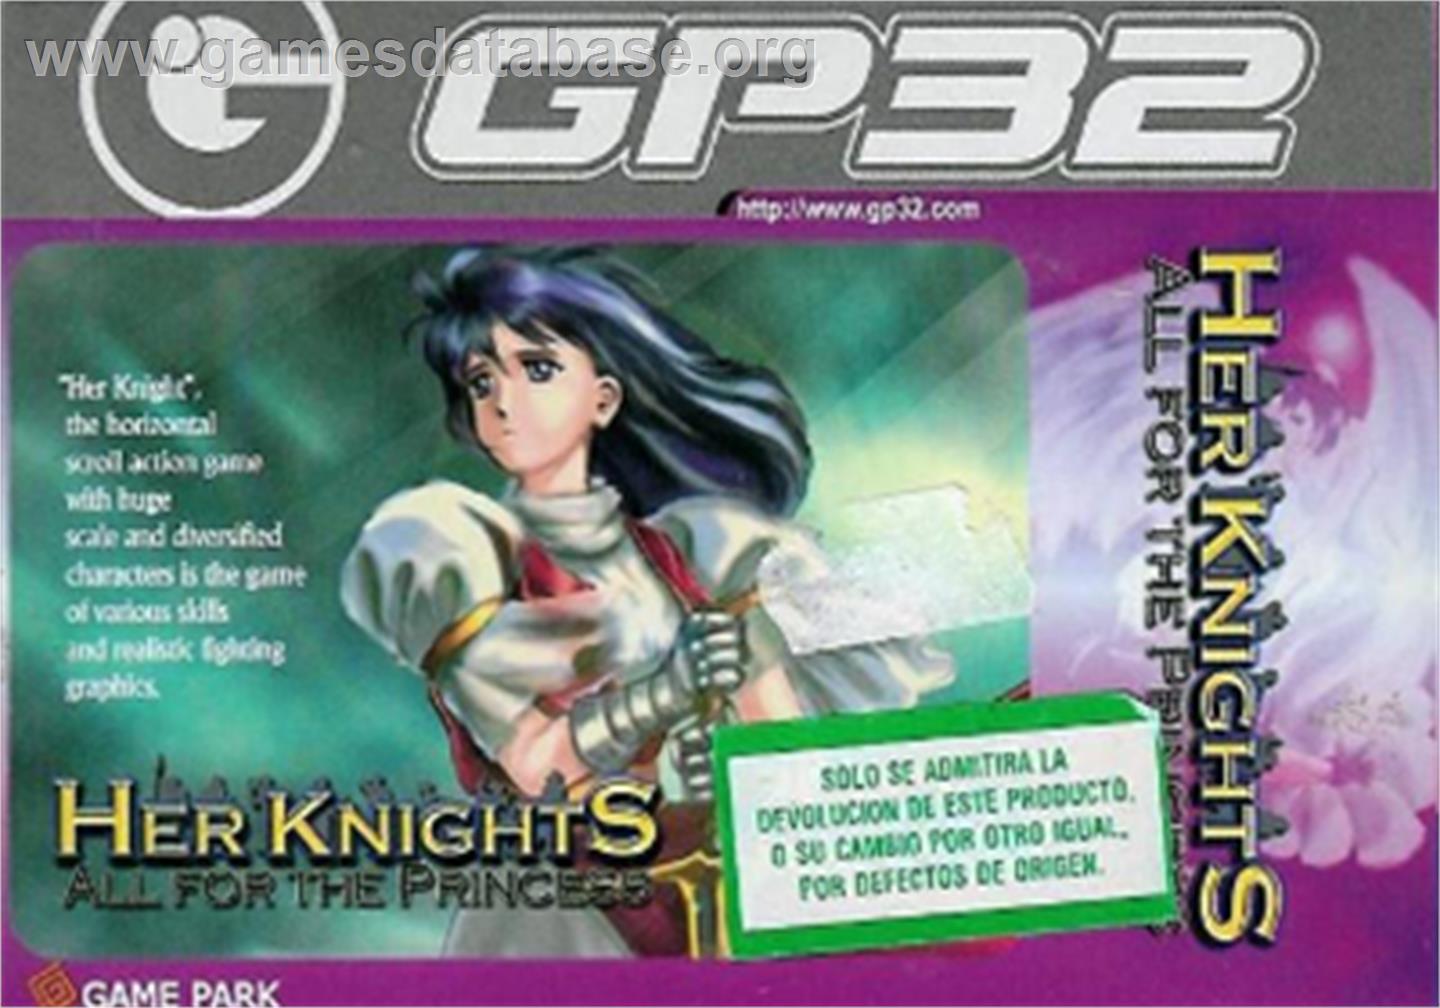 Her Knights - All for the Princess - Gamepark GP32 - Artwork - Box